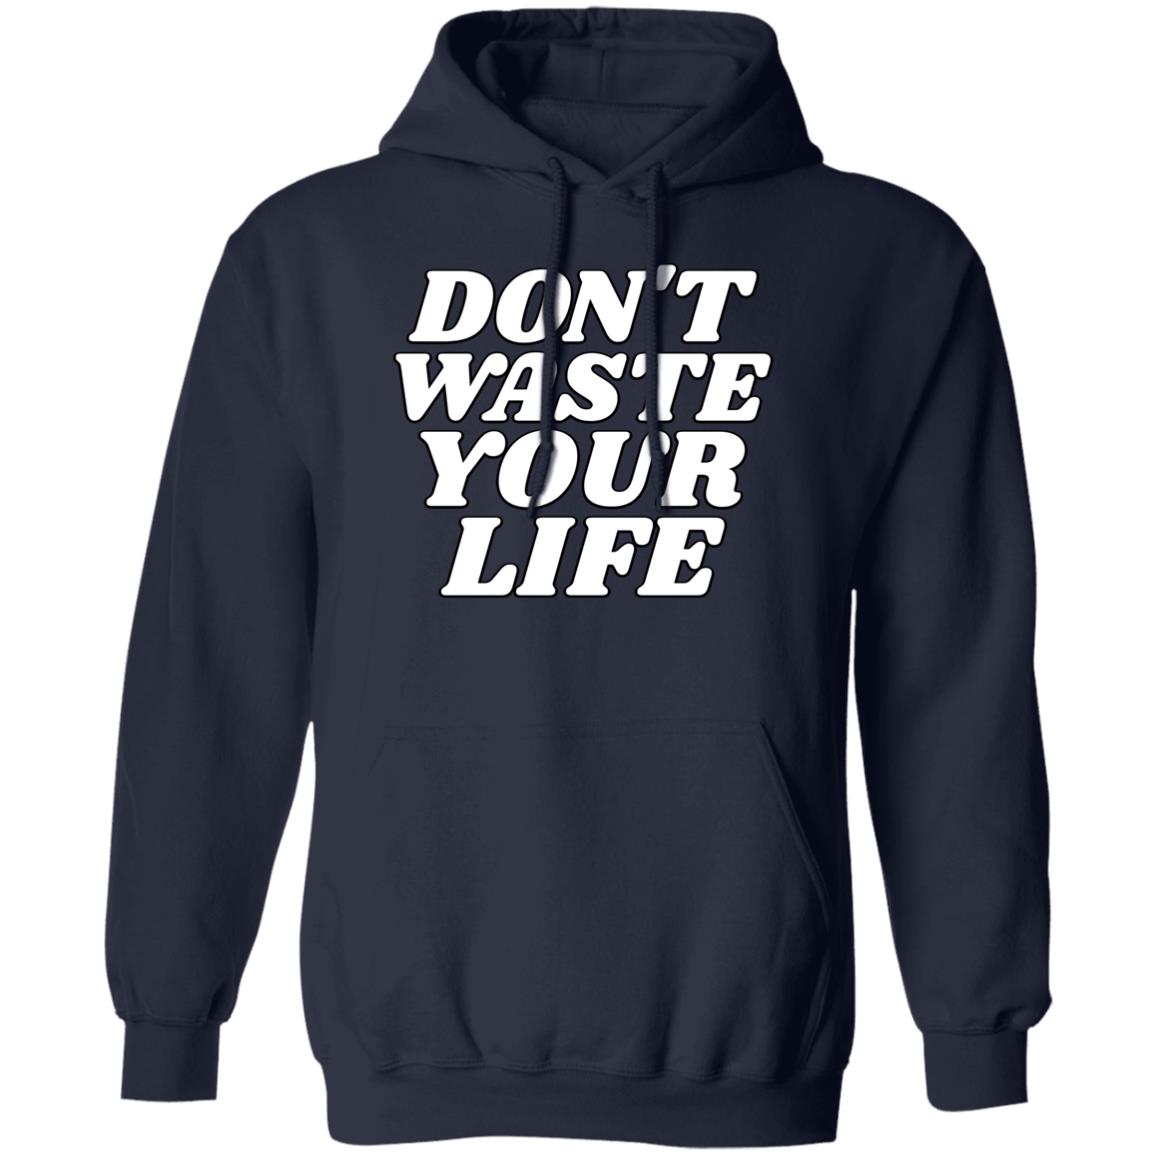 Don't Waste Your Life (Unisex Hoodie)